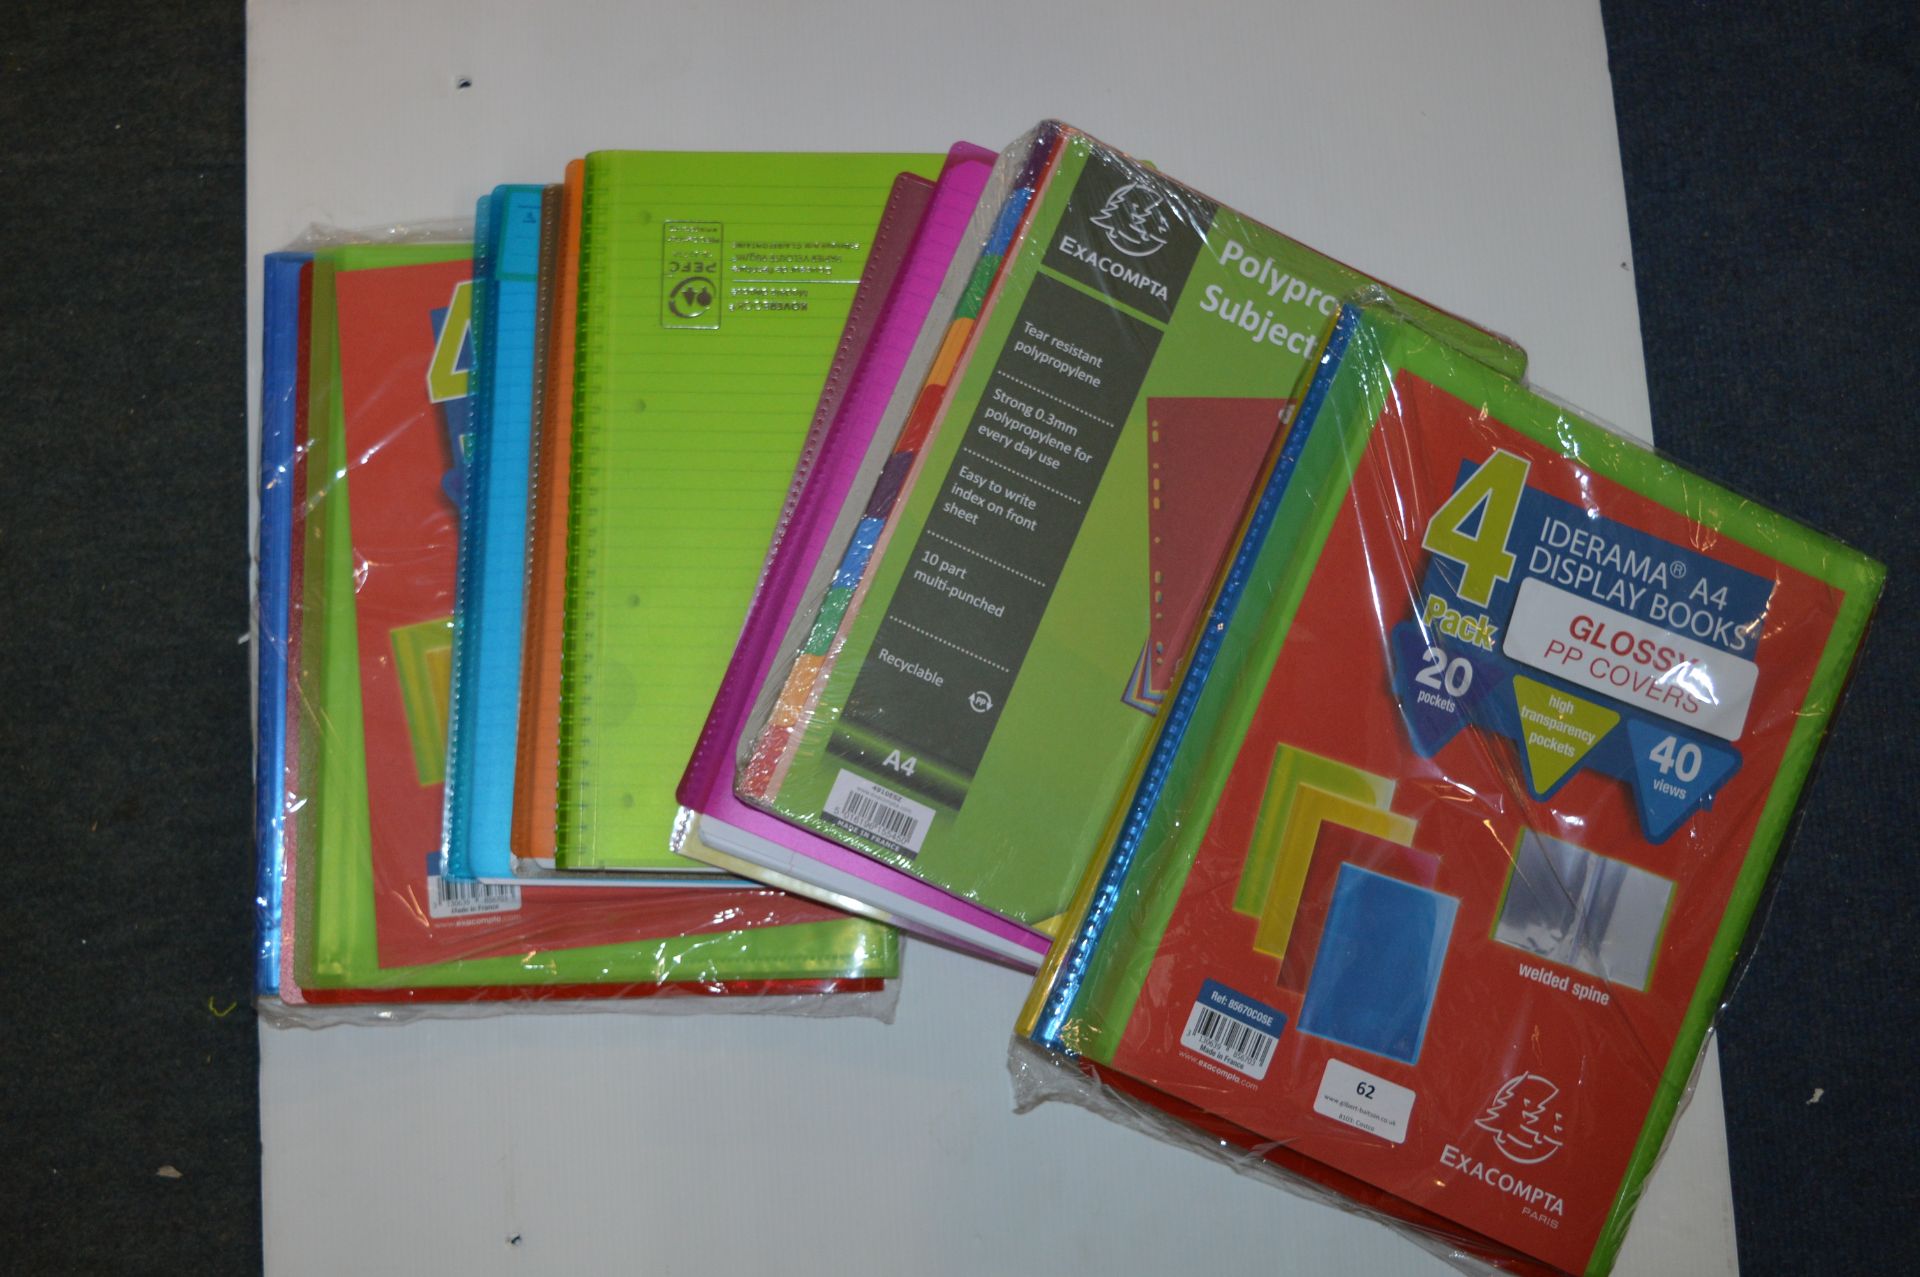 *Spiral Bound Notepads 4pk Plus Dividers and A4 Display Book Covers